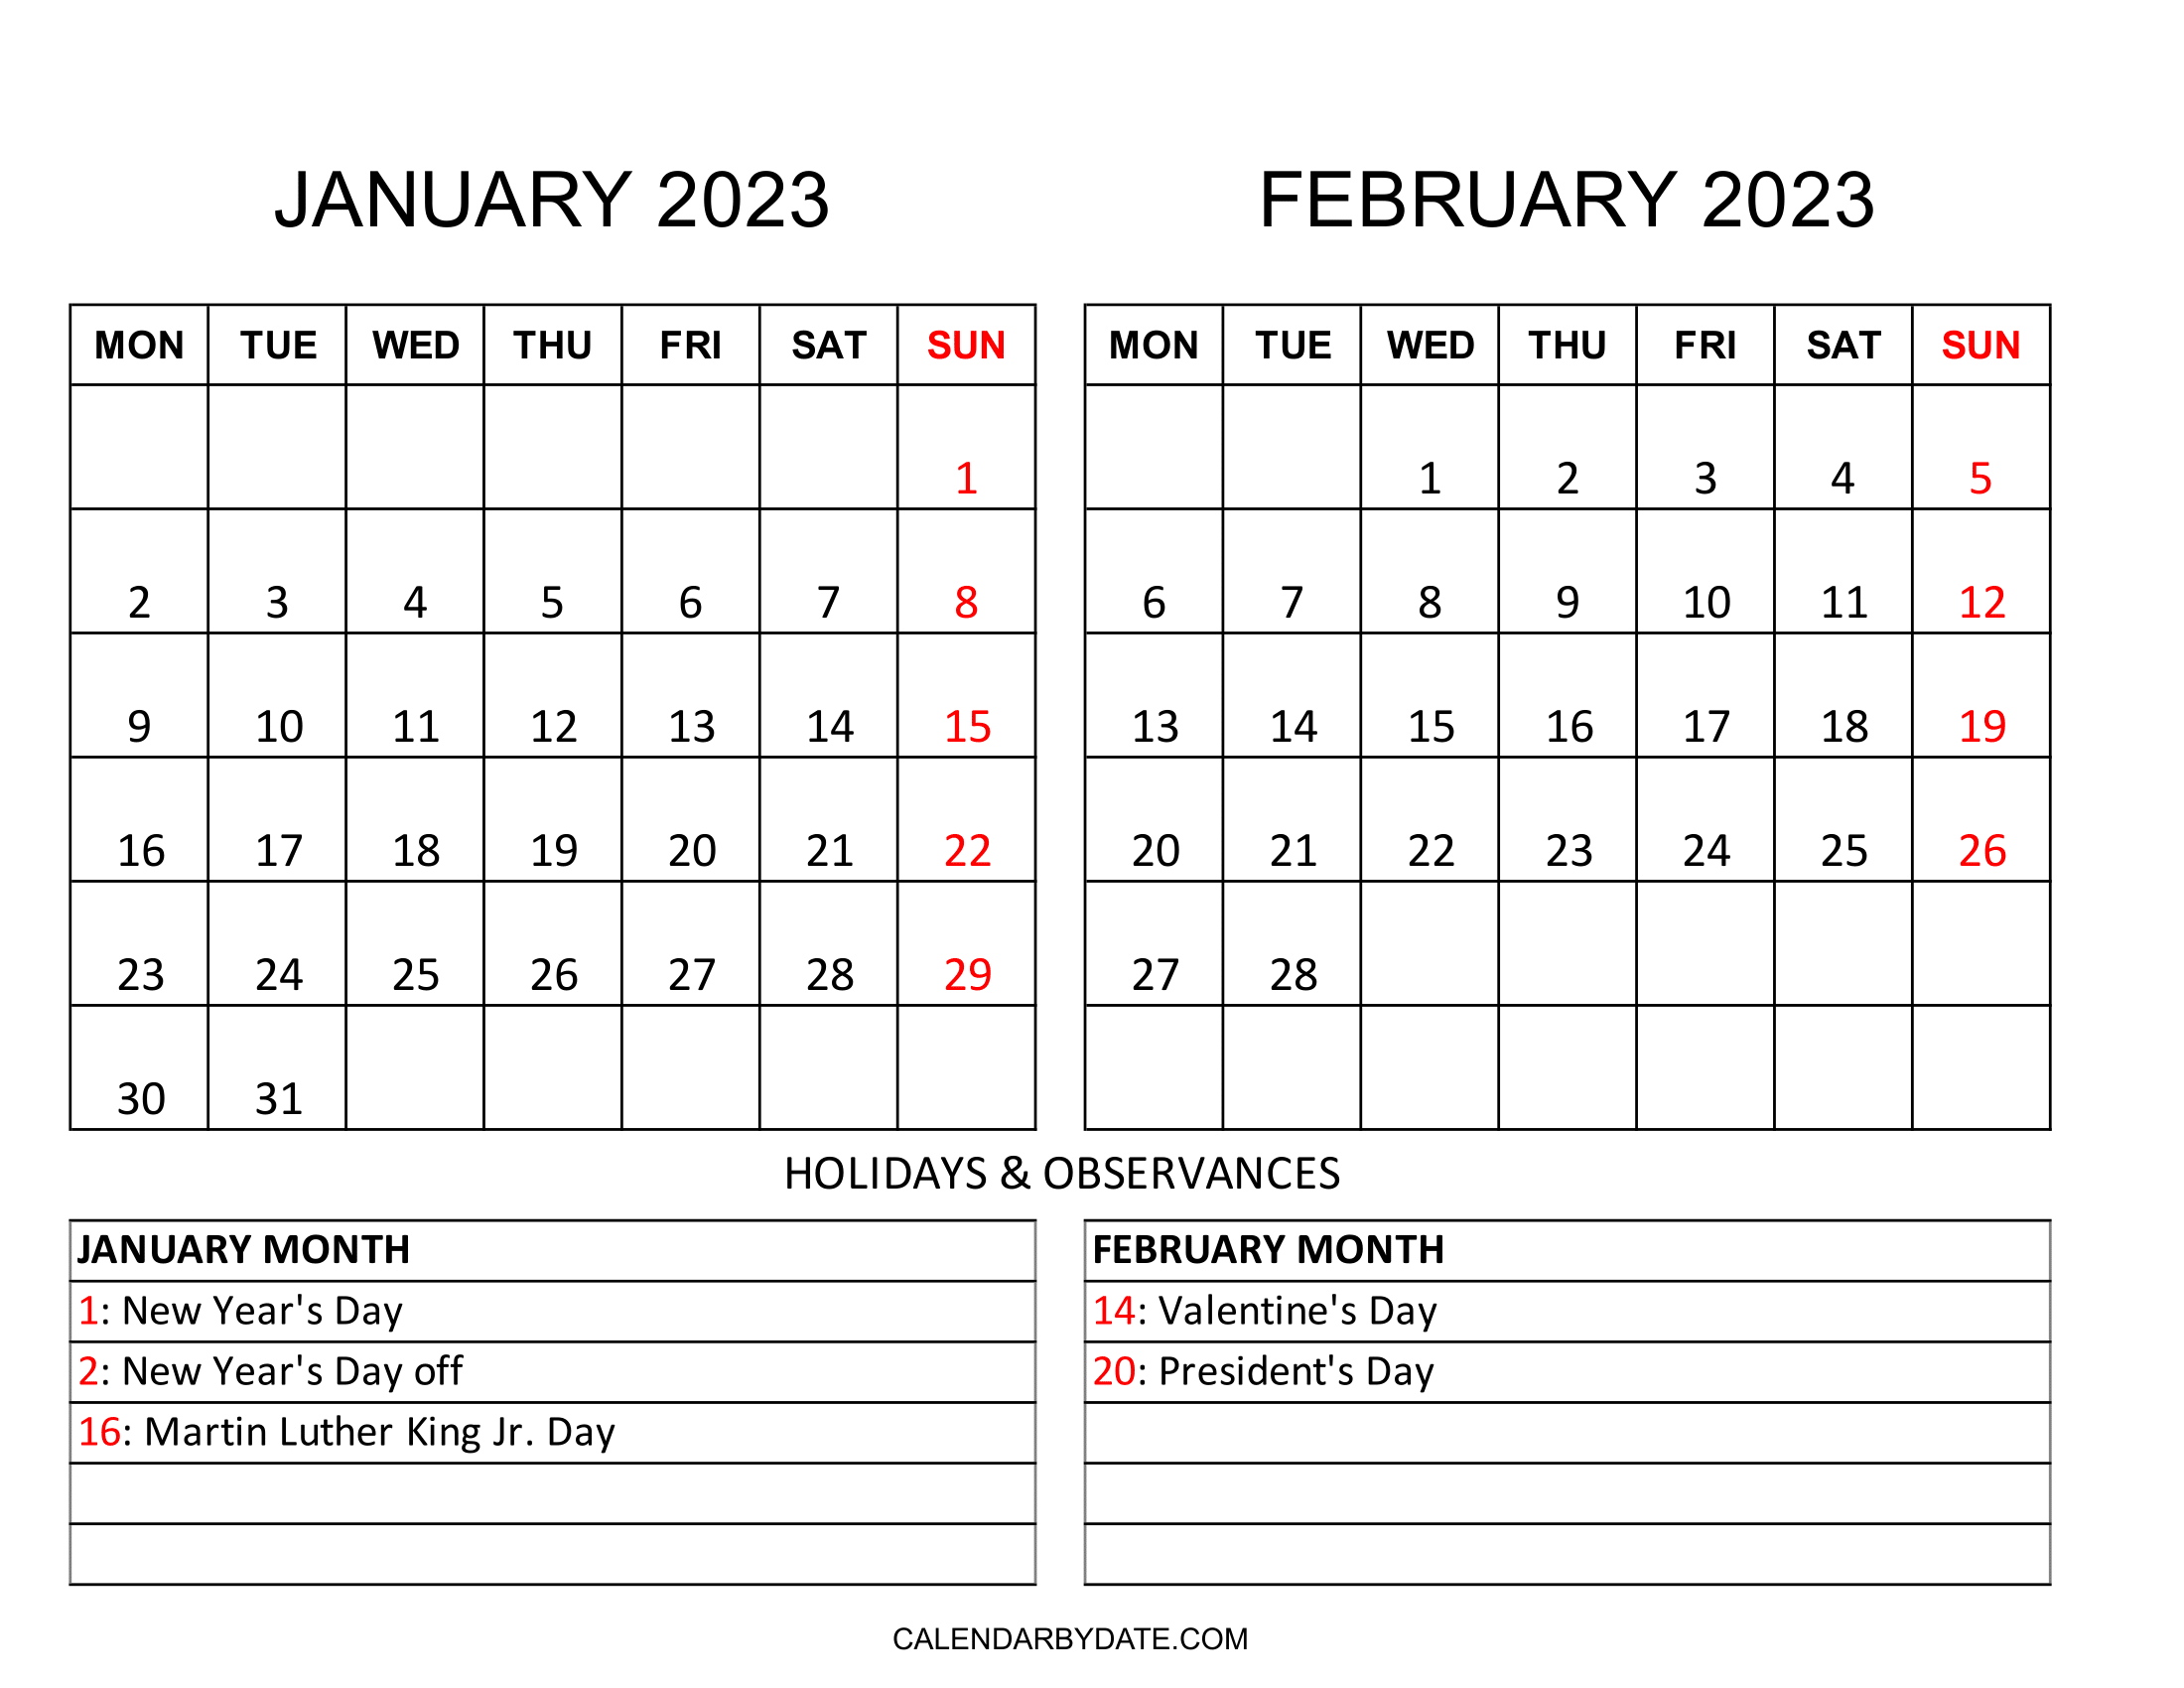 Monthly calendar for January and February 2023 including a list of bank, school, federal holidays and observances. The dates of the holidays are marked in red color.